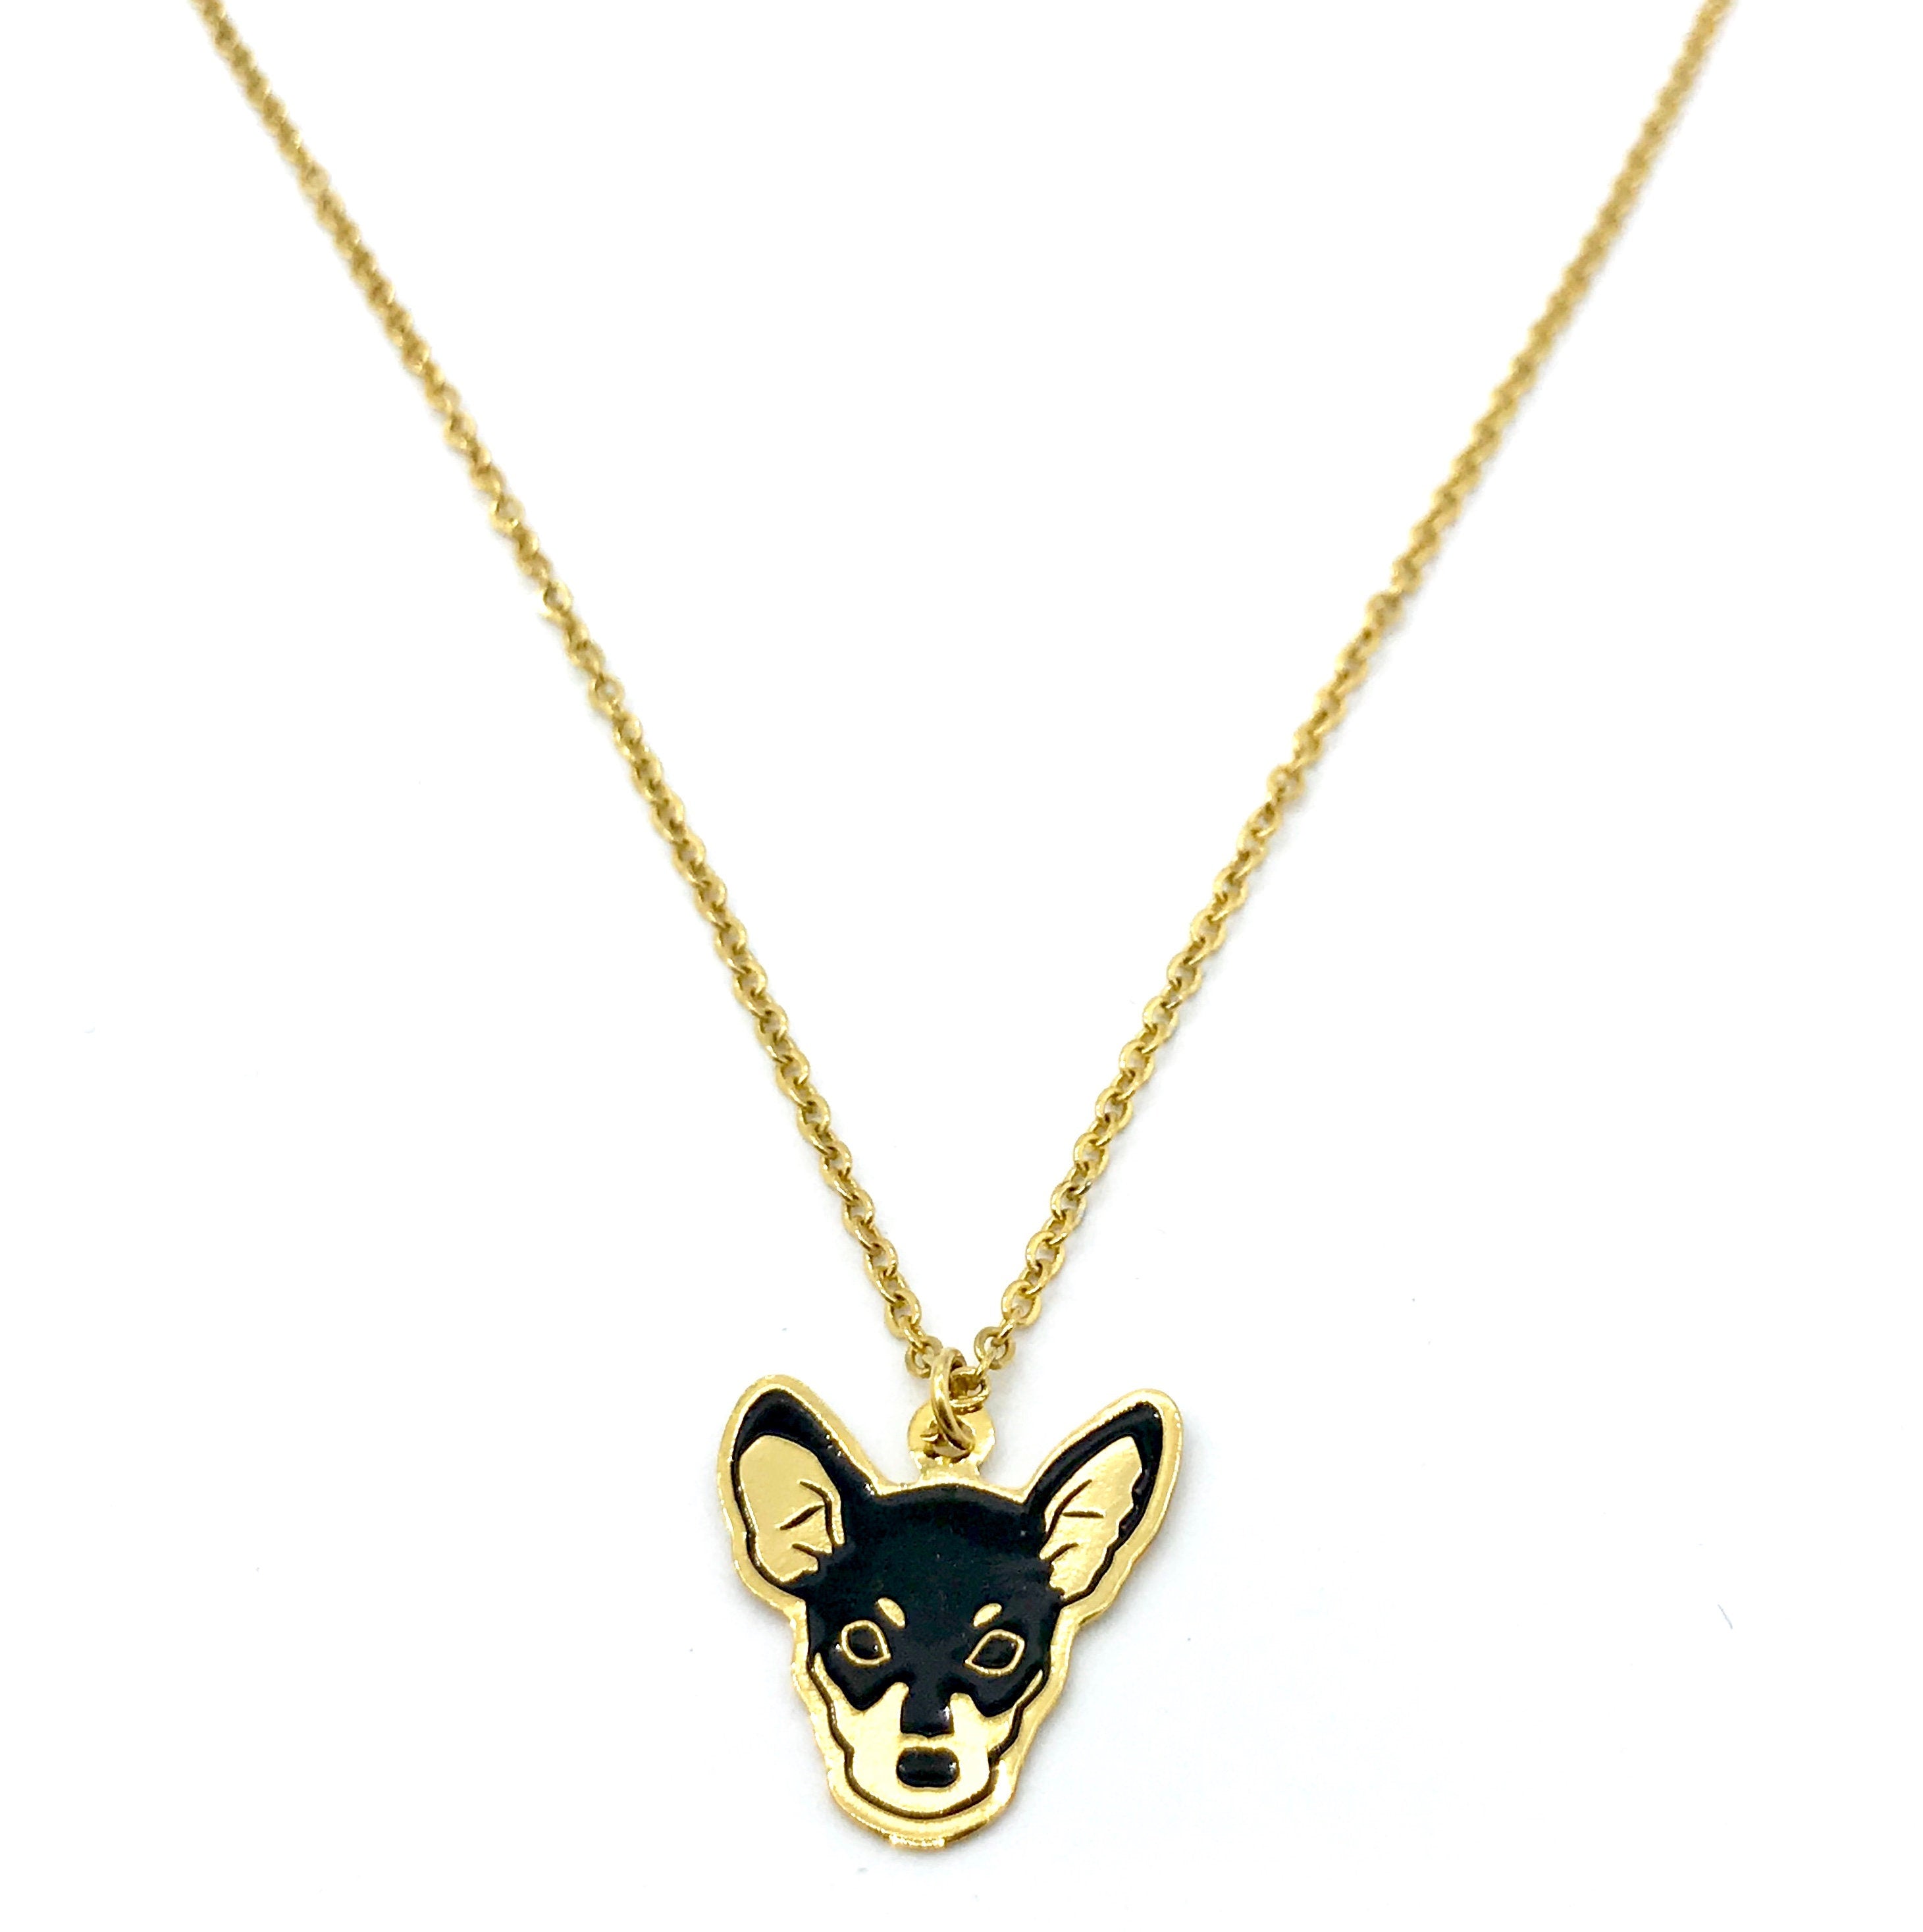 Pinscher Necklace, dog breeds, pet lovers, Necklace women, unique jewelry, Necklace, dog lovers, dog rescue, fashion jewelry